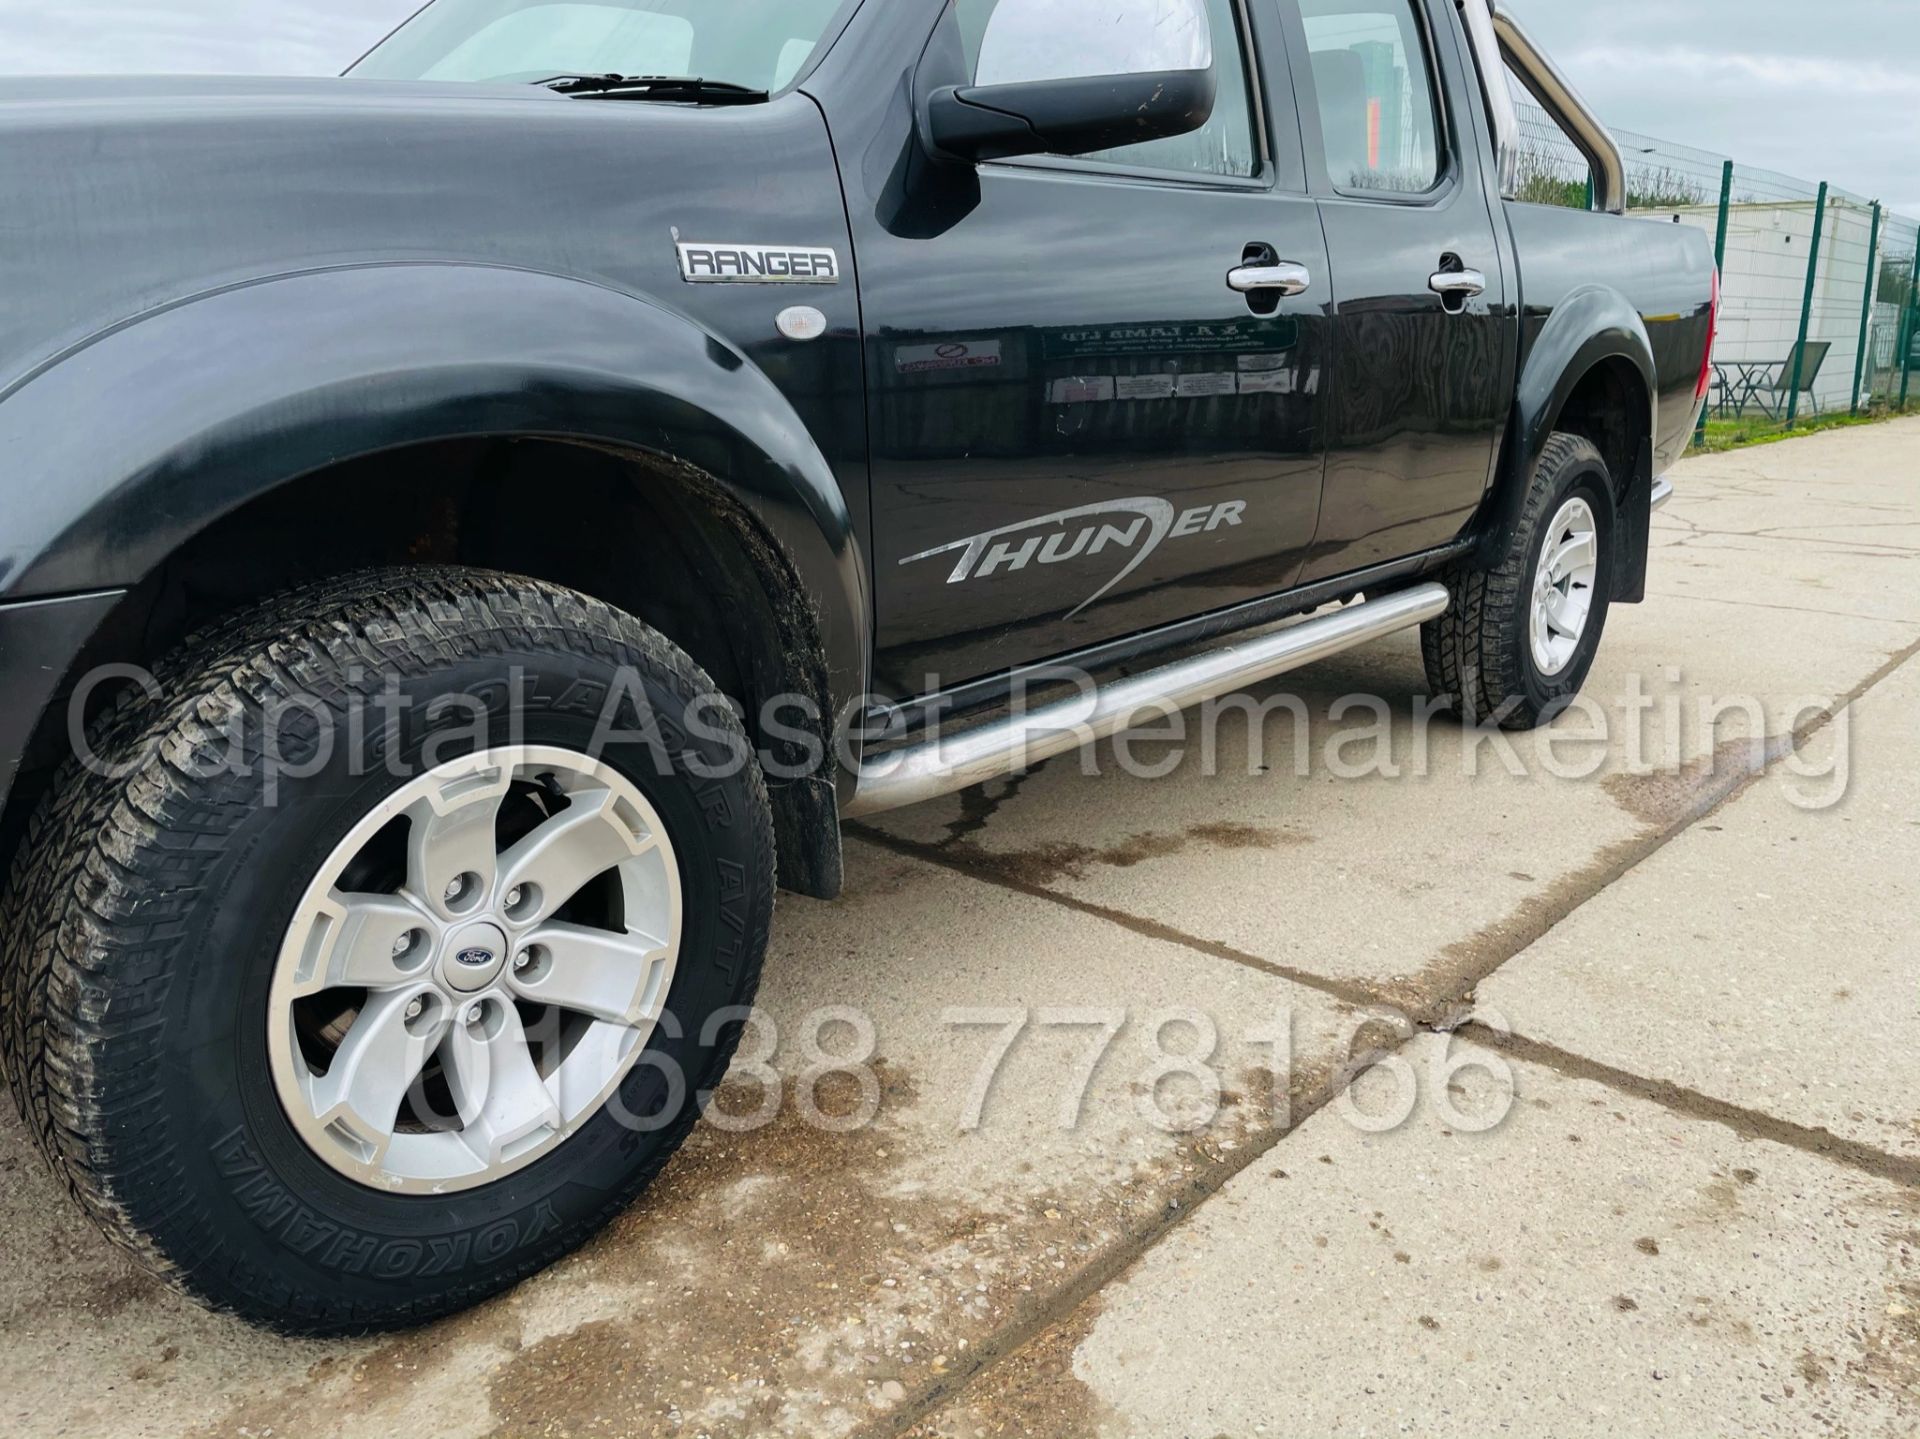 ON SALE FORD RANGER *THUNDER* DOUBLE CAB 4X4 PICK-UP (2009) '2.5 TDCI - 1 *LEATHER - A/C* (NO VAT) - Image 18 of 40